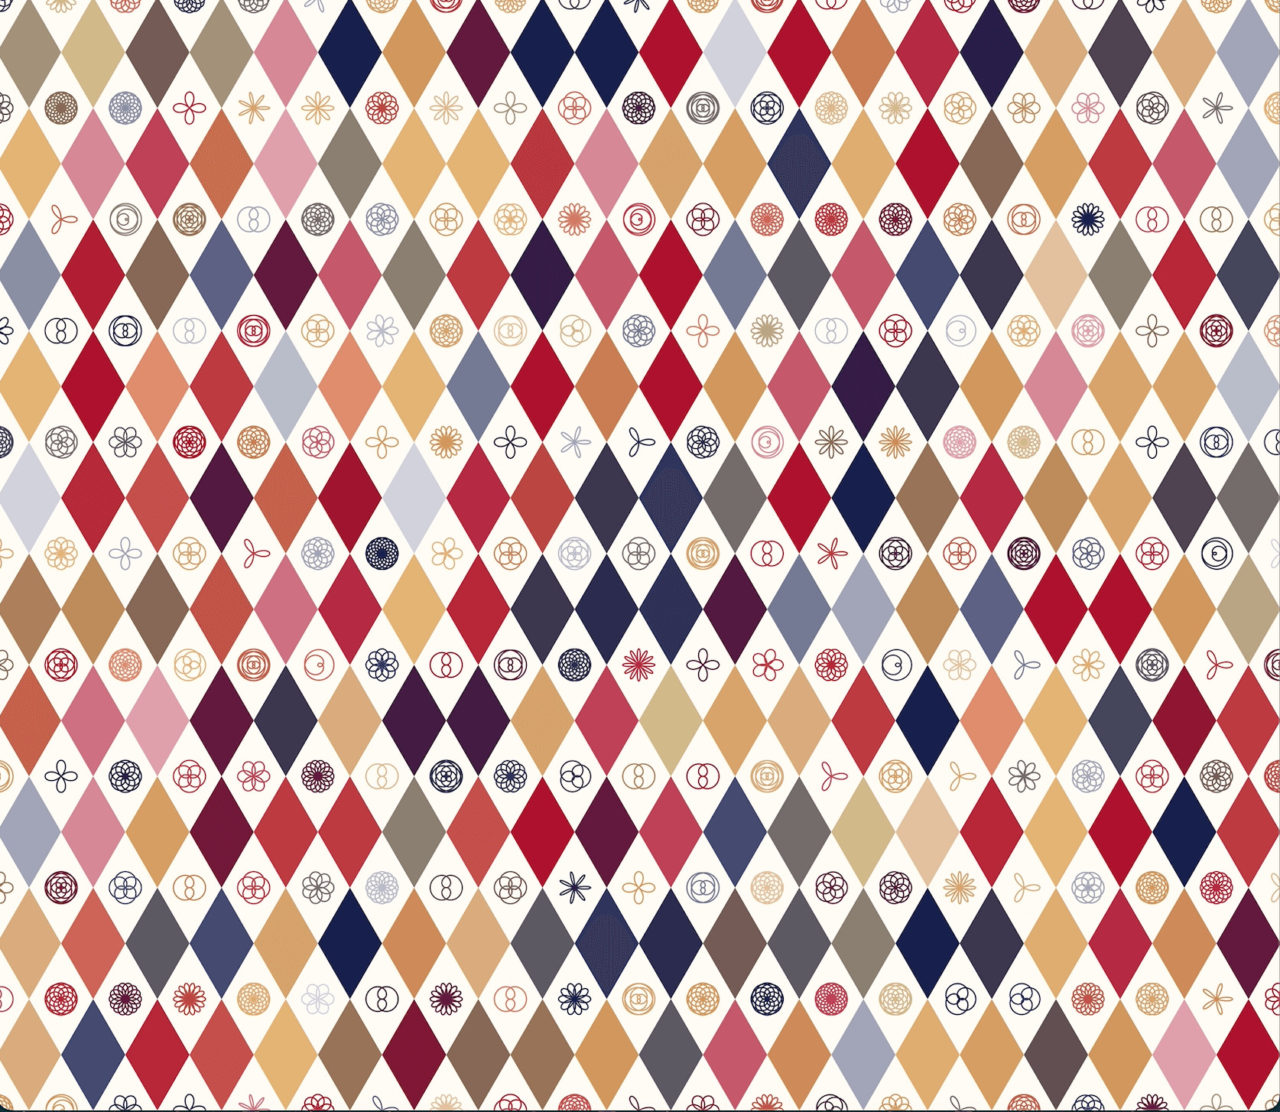 Multicolor harlequin diamond pattern with repeating rosette designs